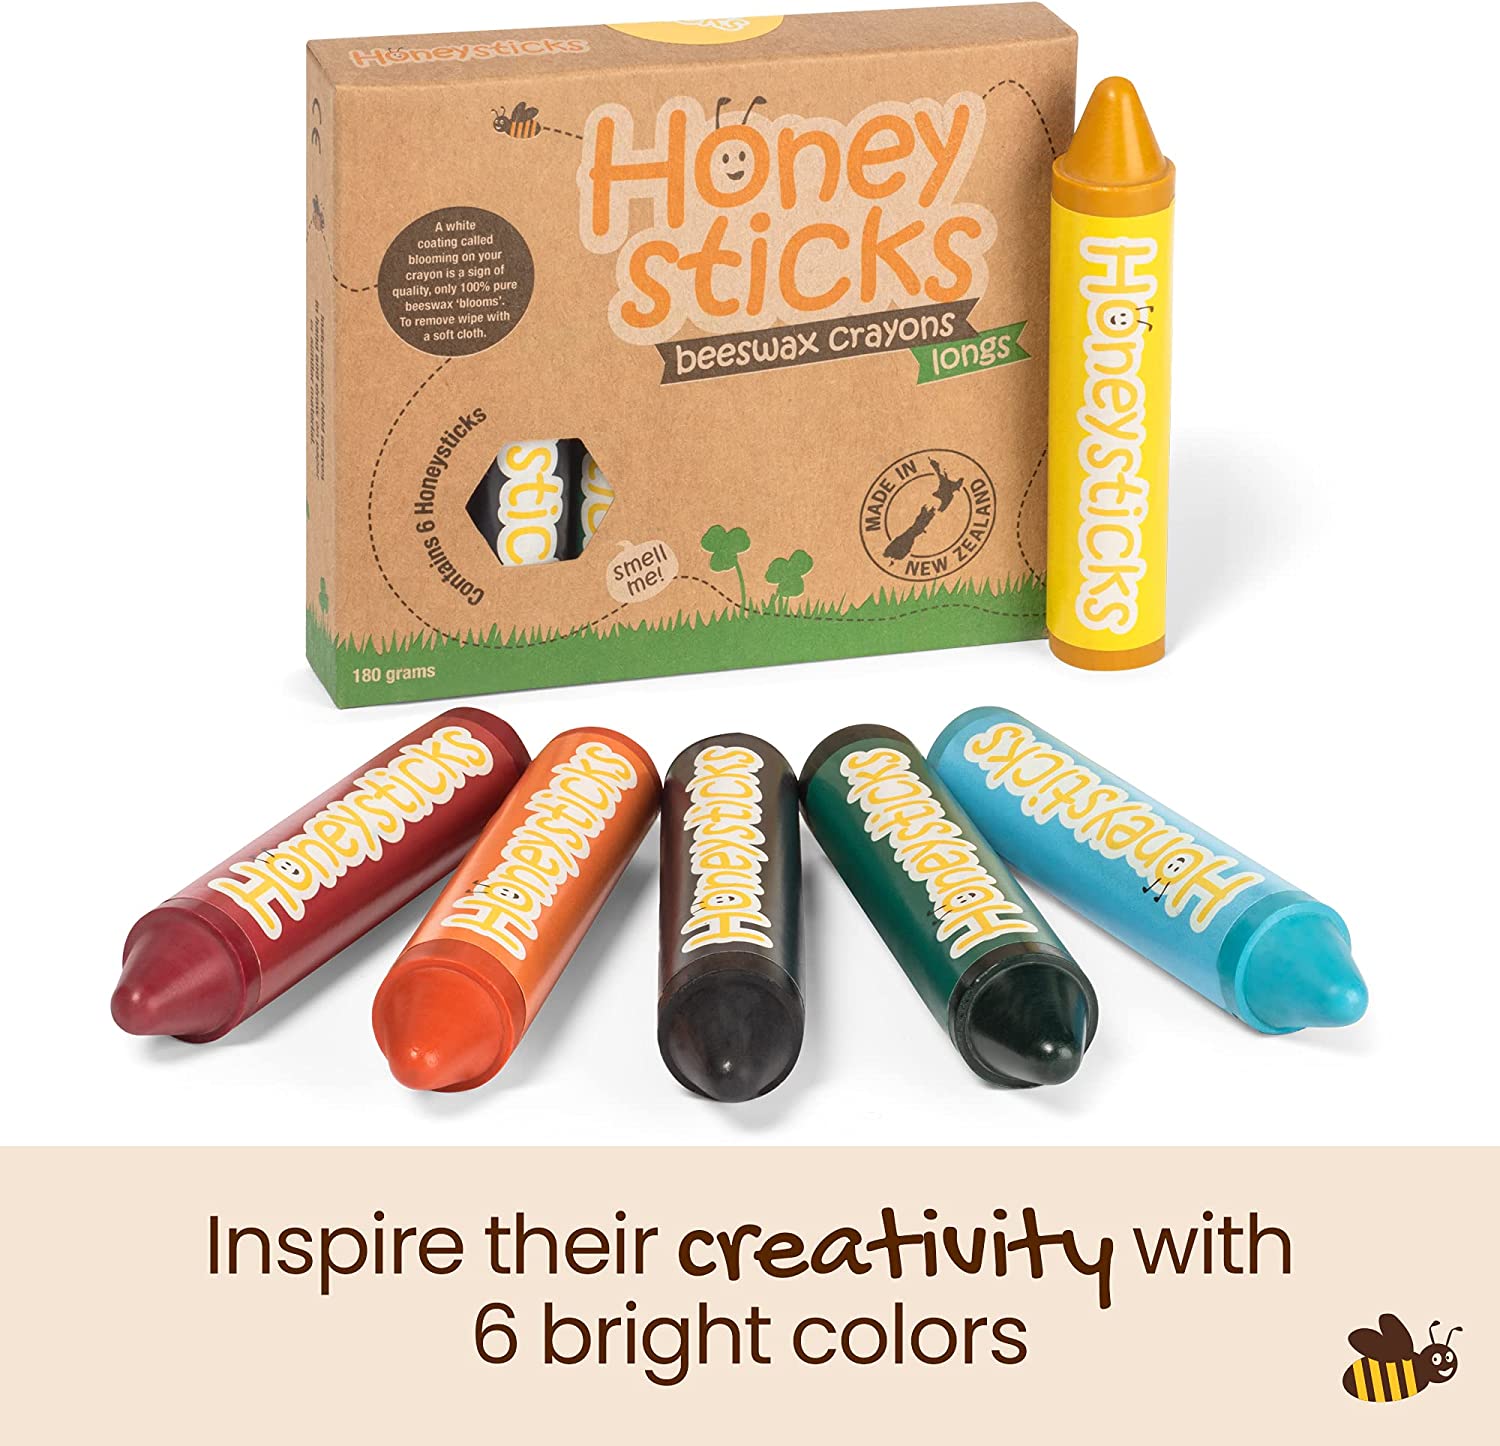  Honeysticks Triangular Crayons (10 Pack) - 100% Pure Beeswax,  Food Grade Colors, Non Toxic Crayons for Baby, Toddlers ages 1-3,2-4,  Triangle Shape for Pencil Grip Development. Handmade in New Zealand : Toys  & Games